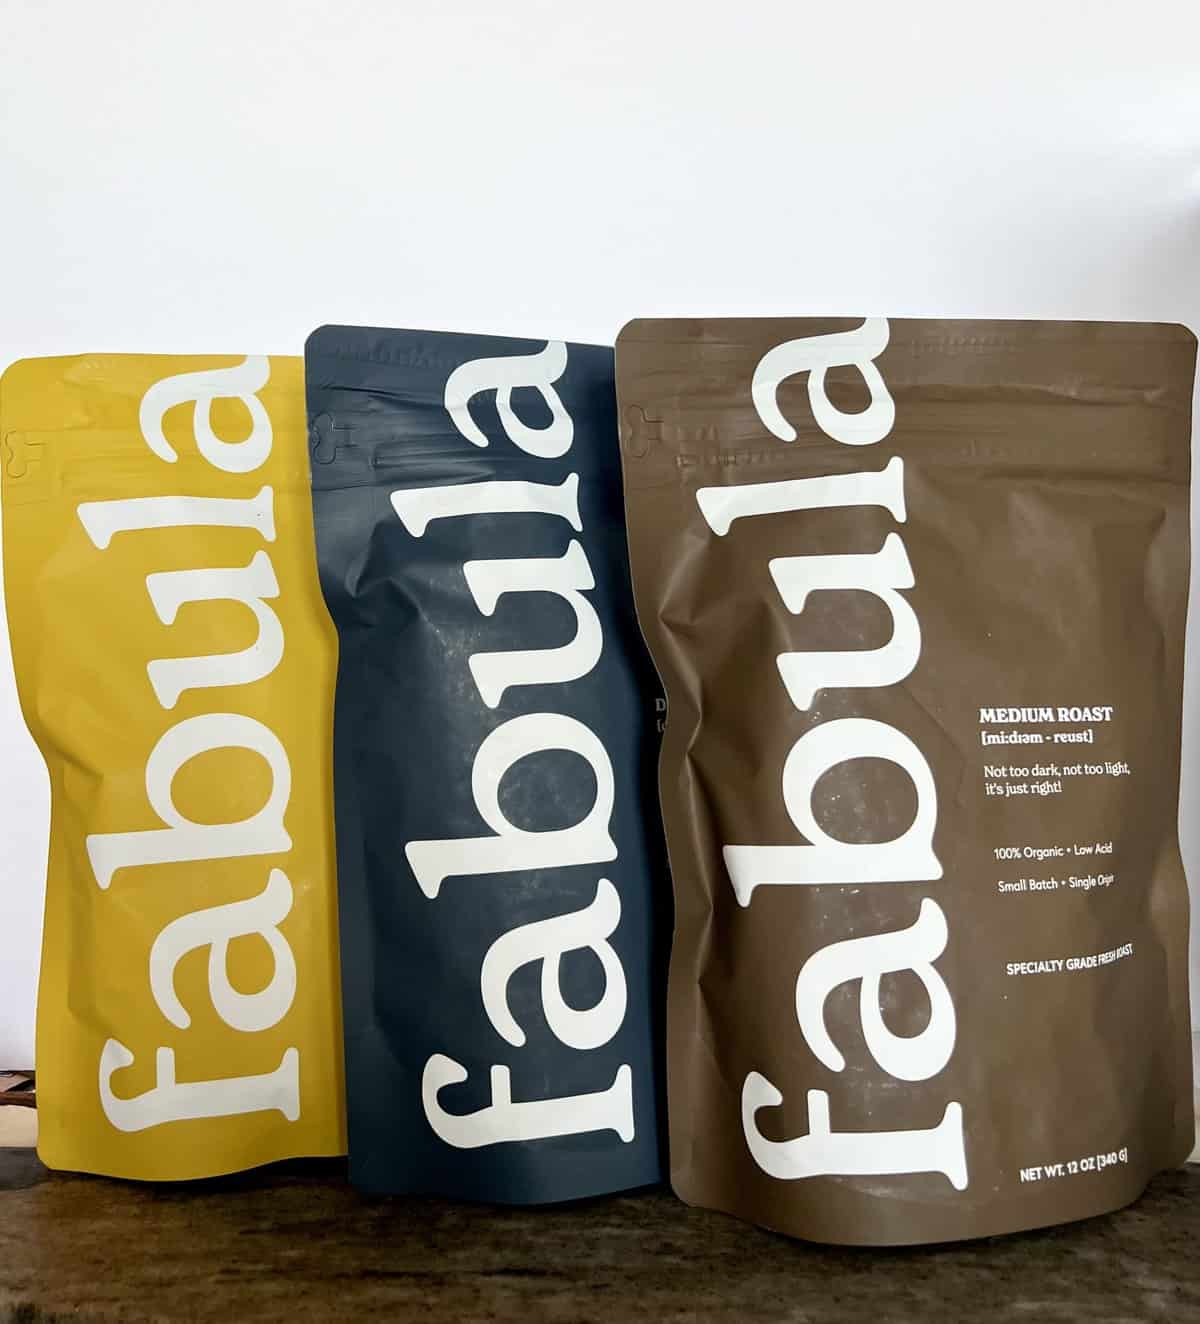 3 different packs of Fabula Coffee